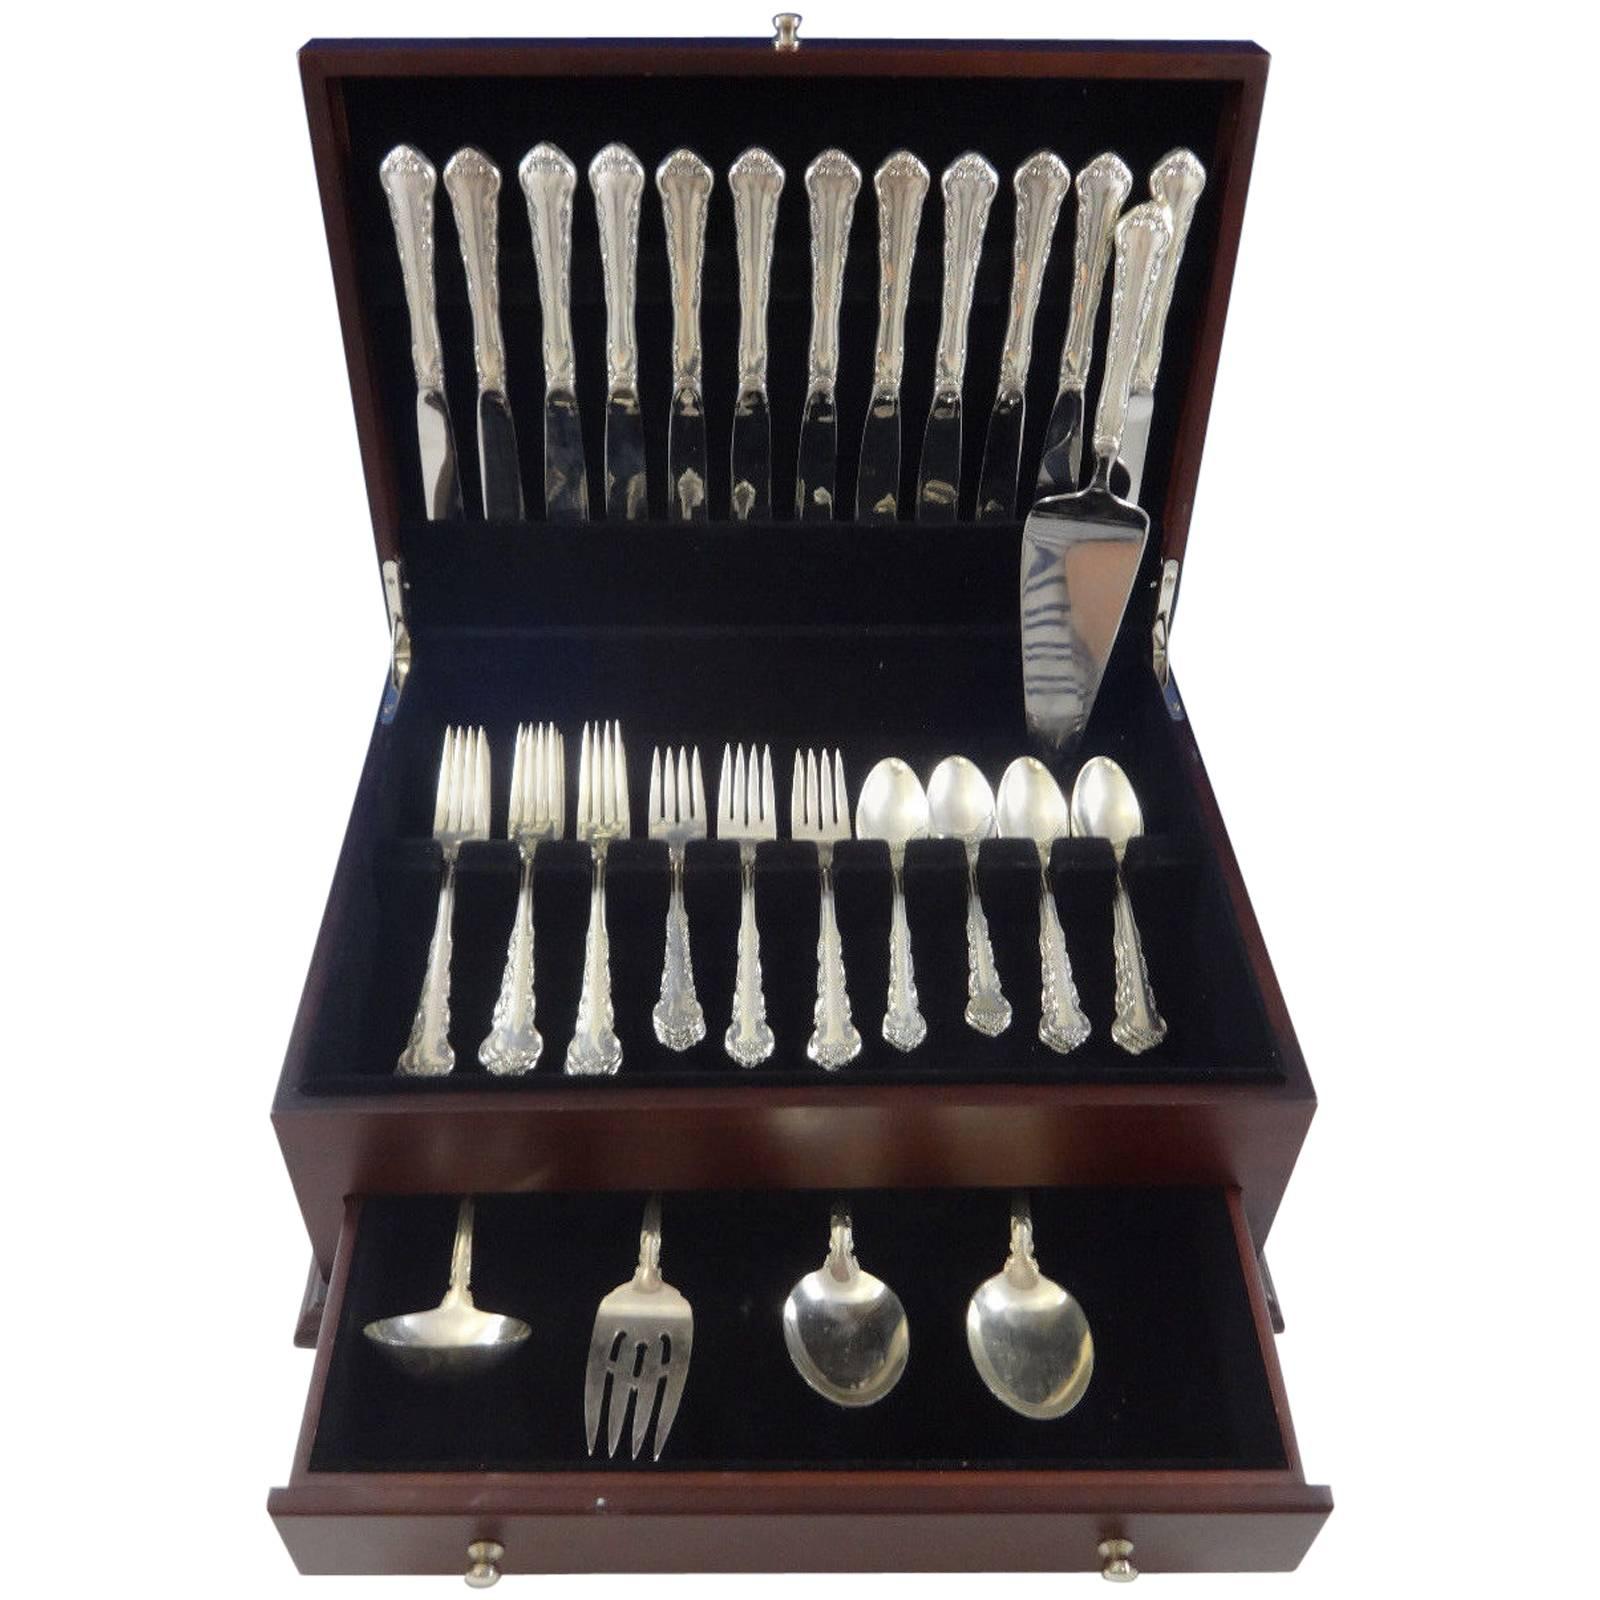 Peachtree Manor by Towle circa 1956 sterling silver flatware set of 53 pieces. This set includes:

12 knives, 9